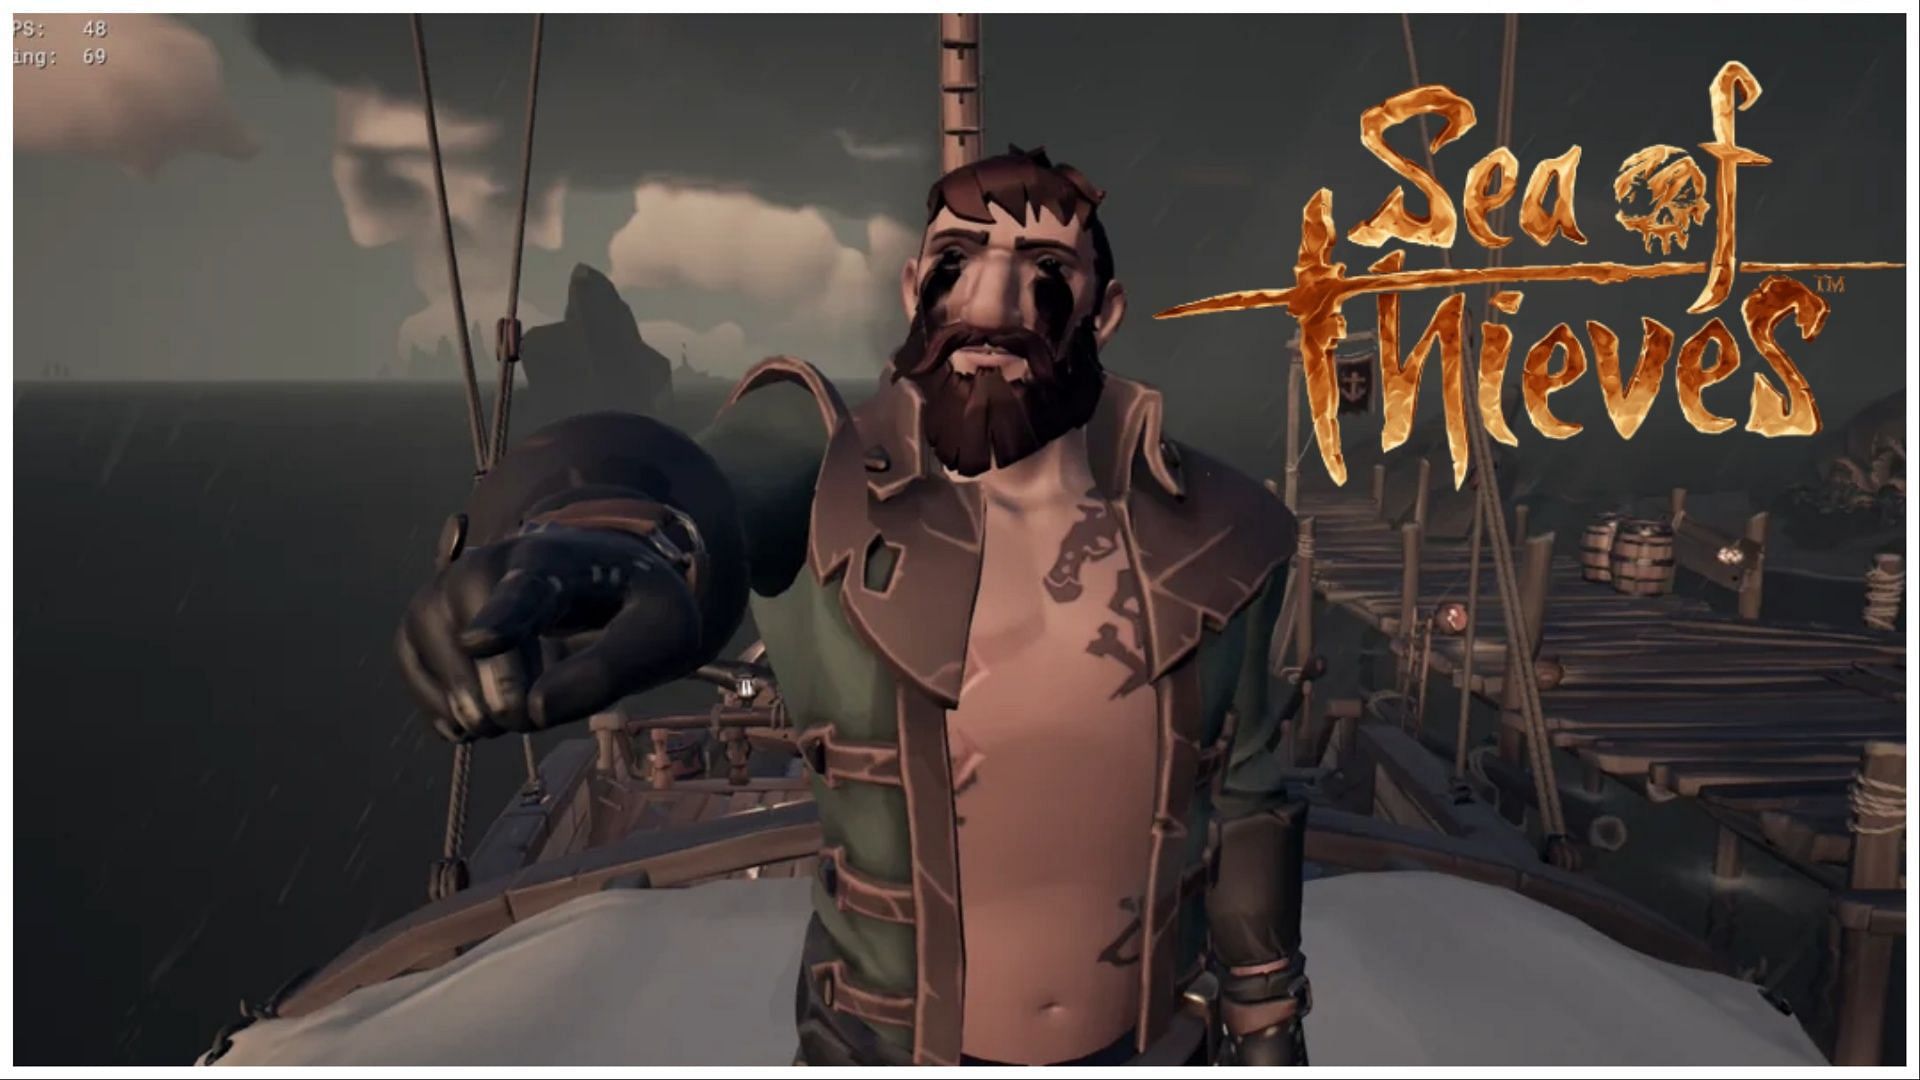 Curse of the Order as seen in Sea of Thieves.